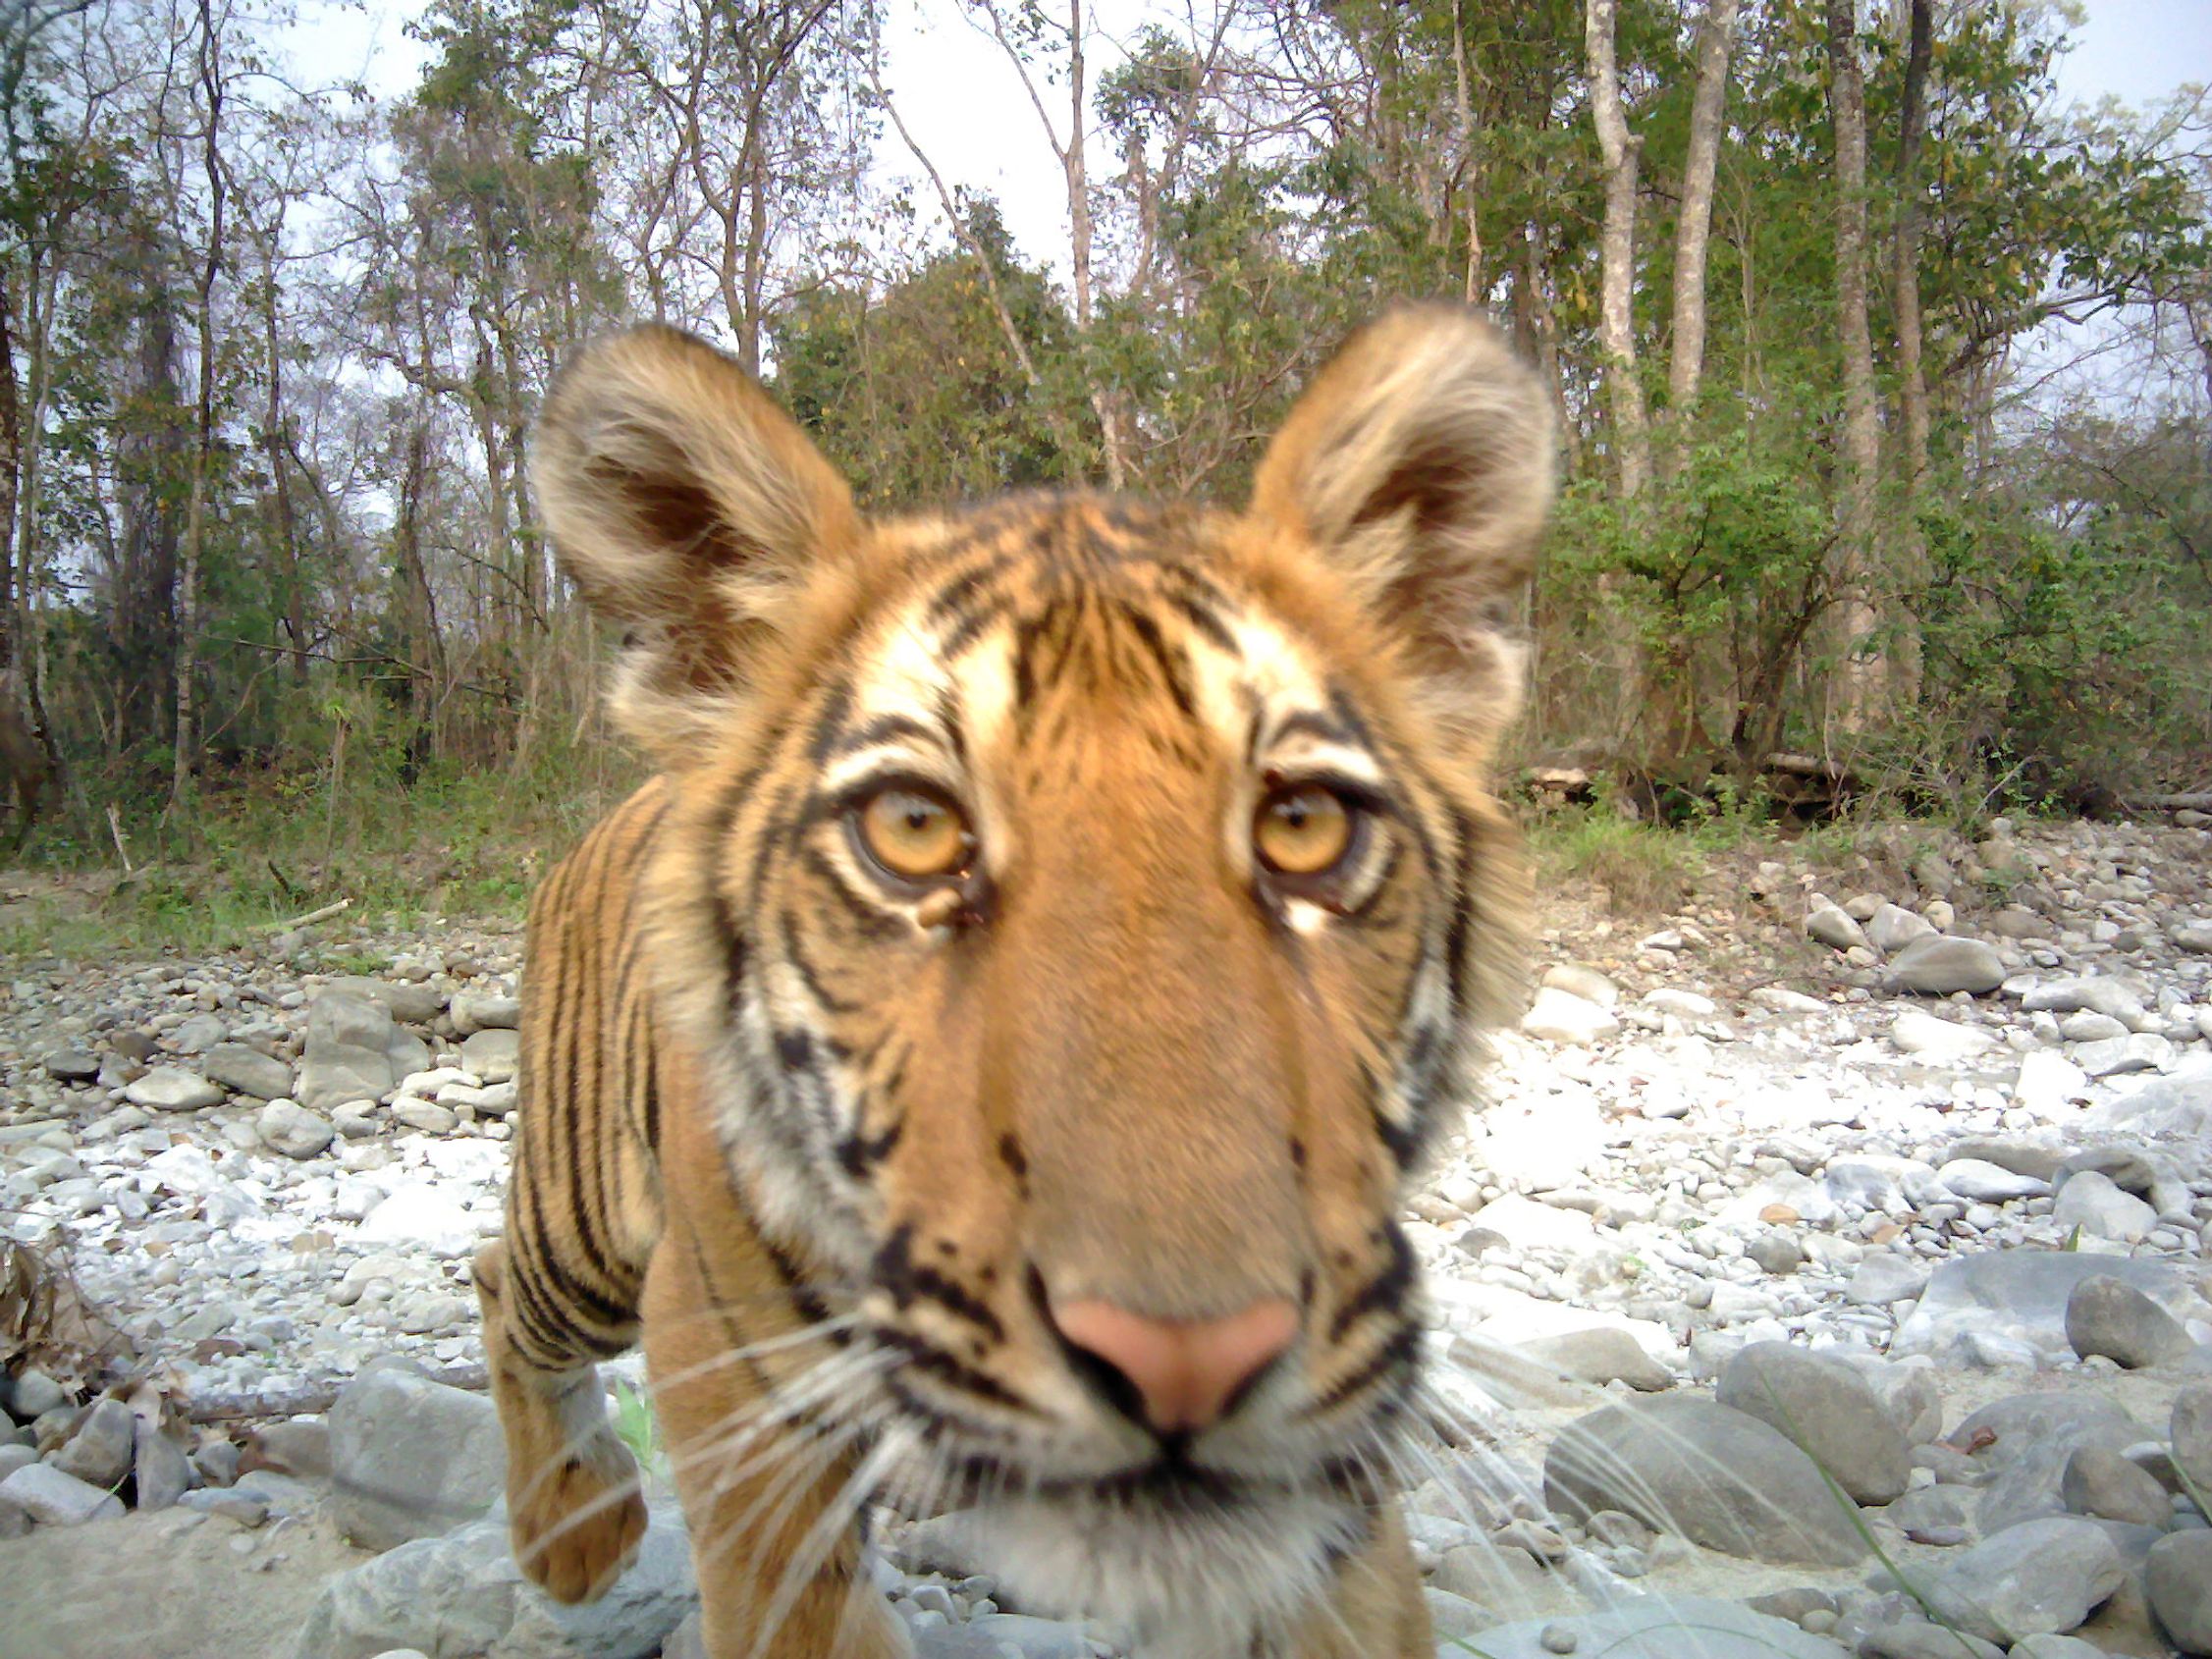 A tiger cub caught on camera trap in India’s Manas National Park, which experienced decades-long unrest  Image credit: Assam Forest Dept, Aaranyak, Panthera